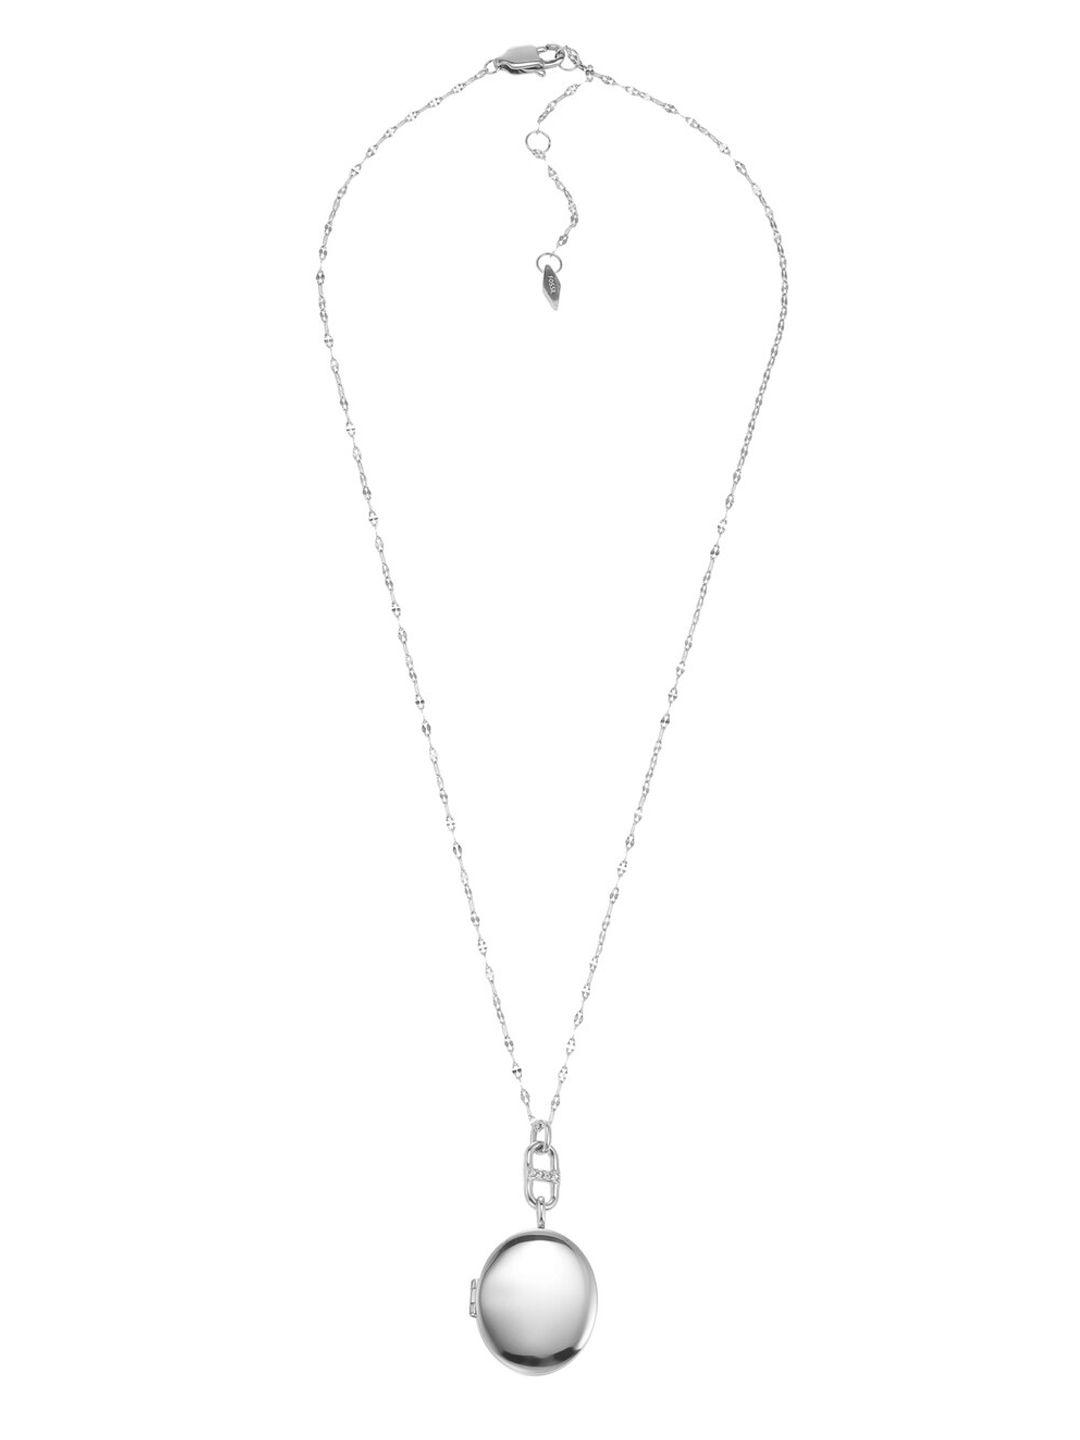 fossil stainless steel round-shaped pendant with chain